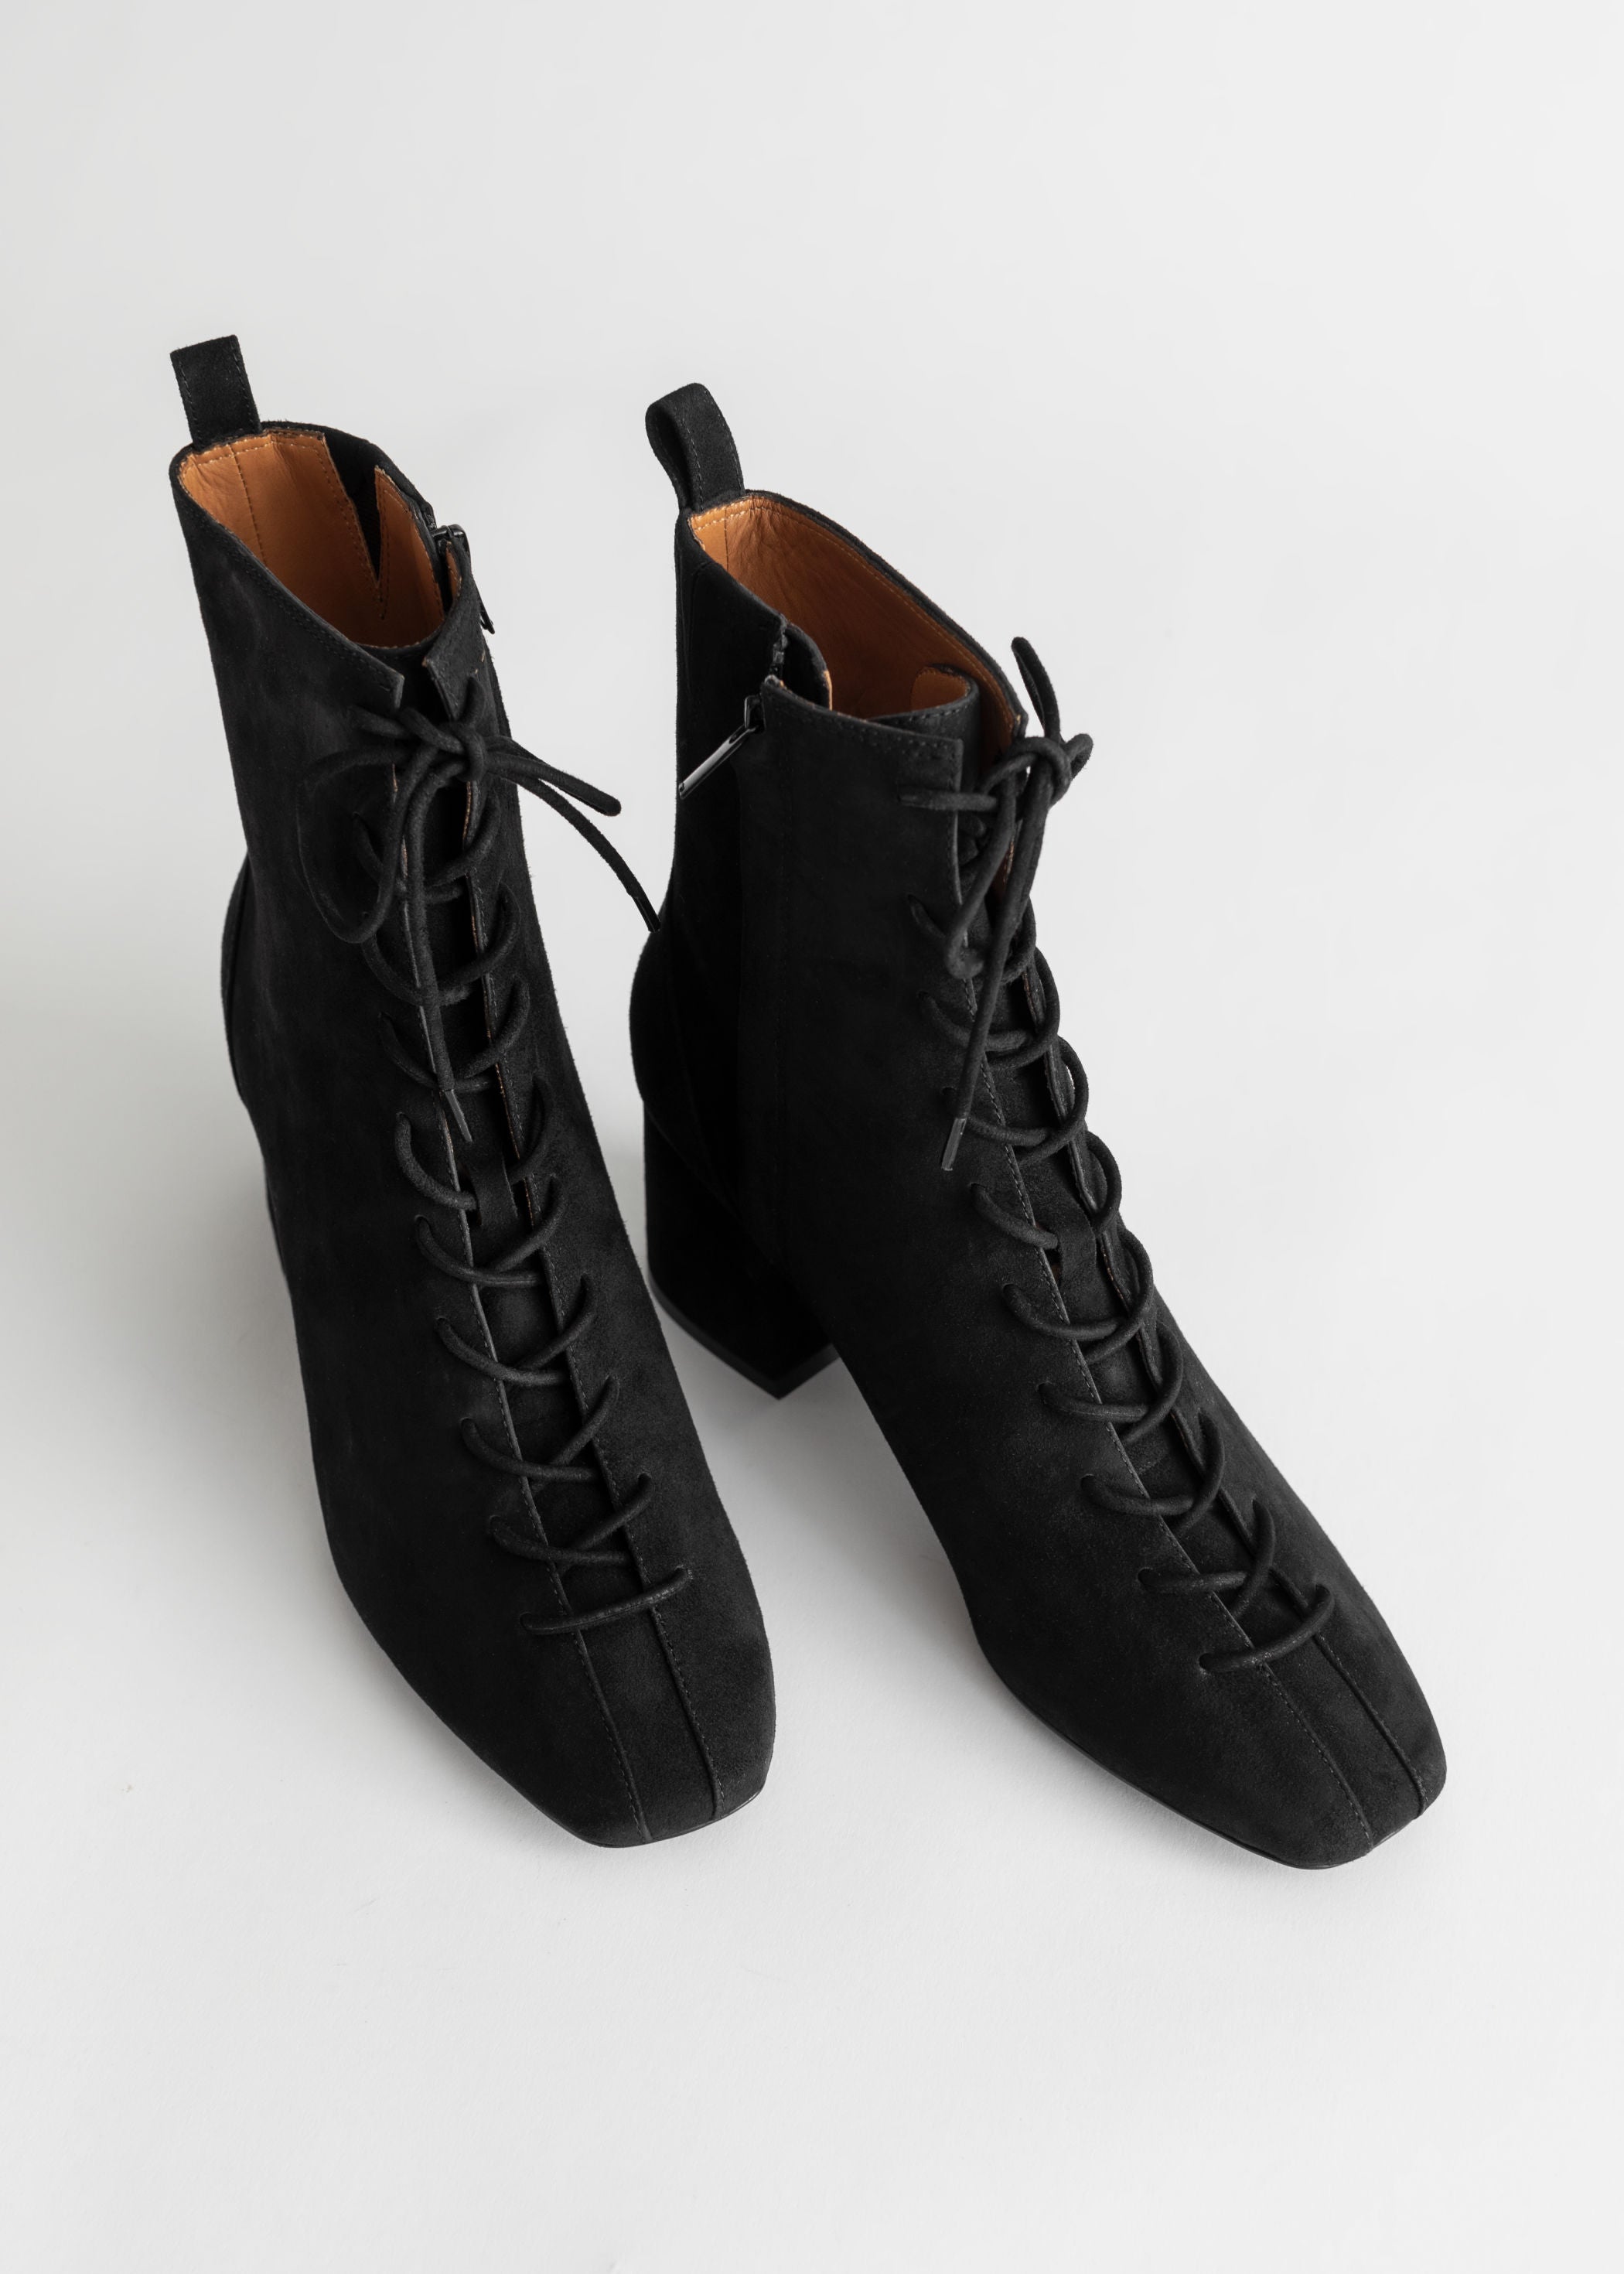 & other stories suede ankle boots